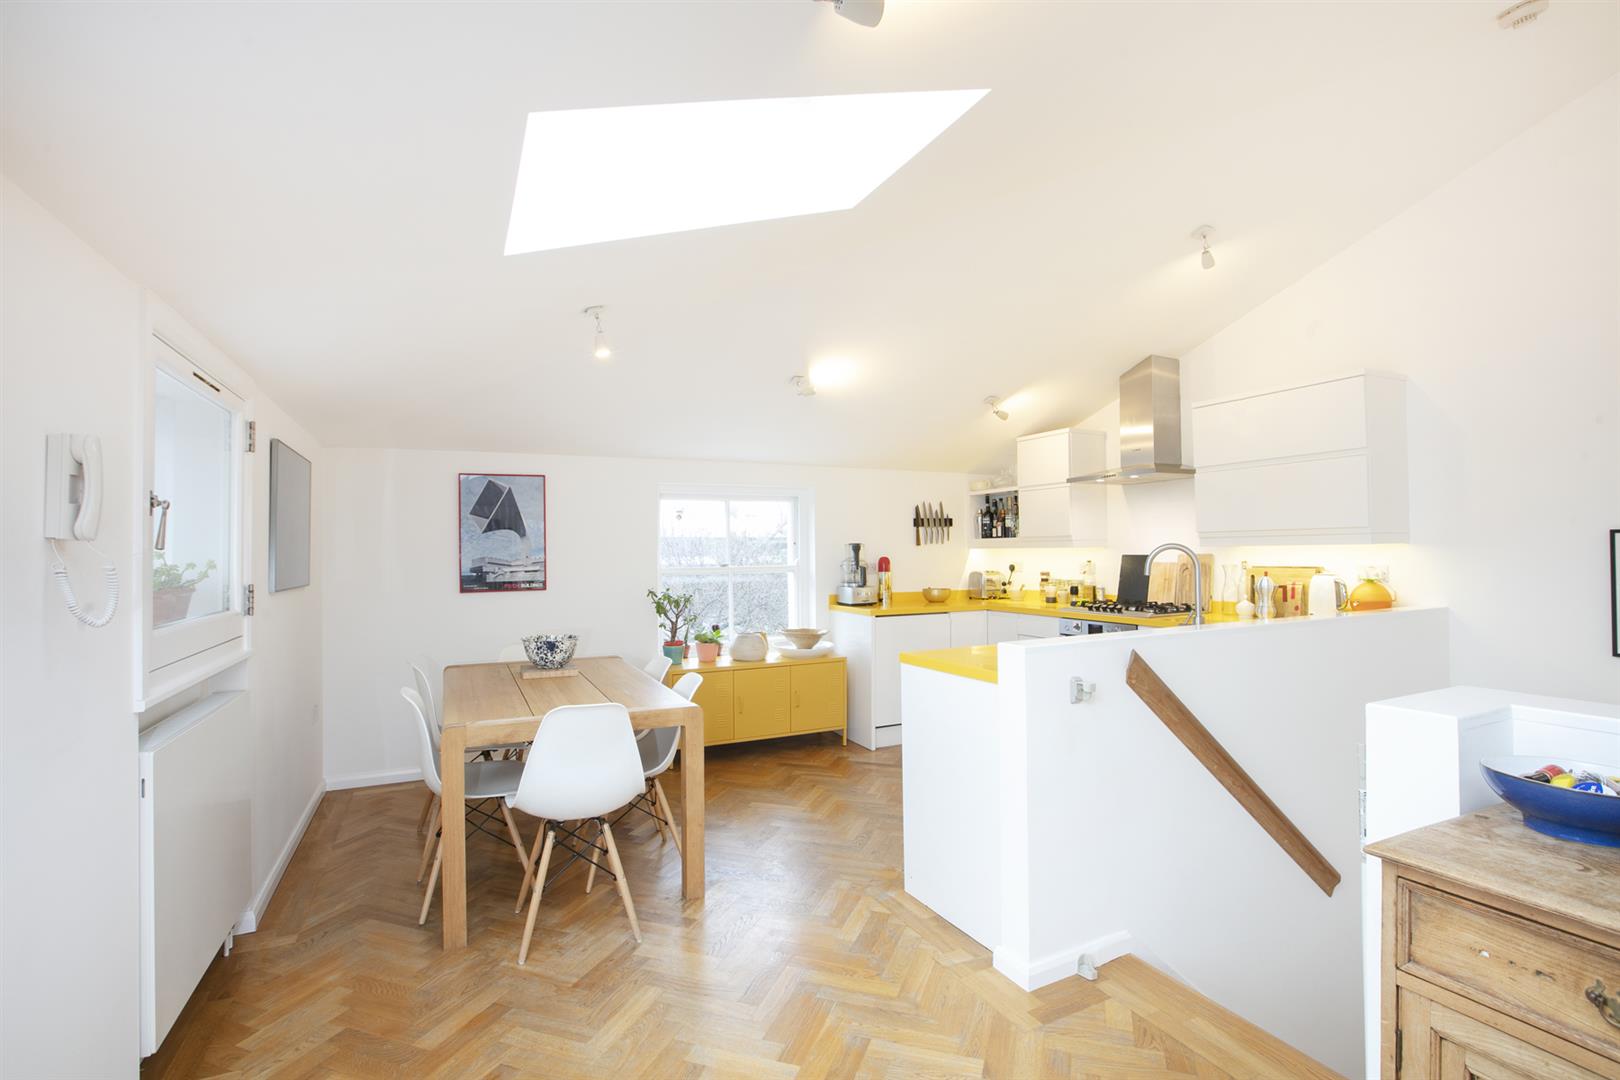 Flat - Conversion Under Offer in Holly Grove, Peckham, SE15 893 view9